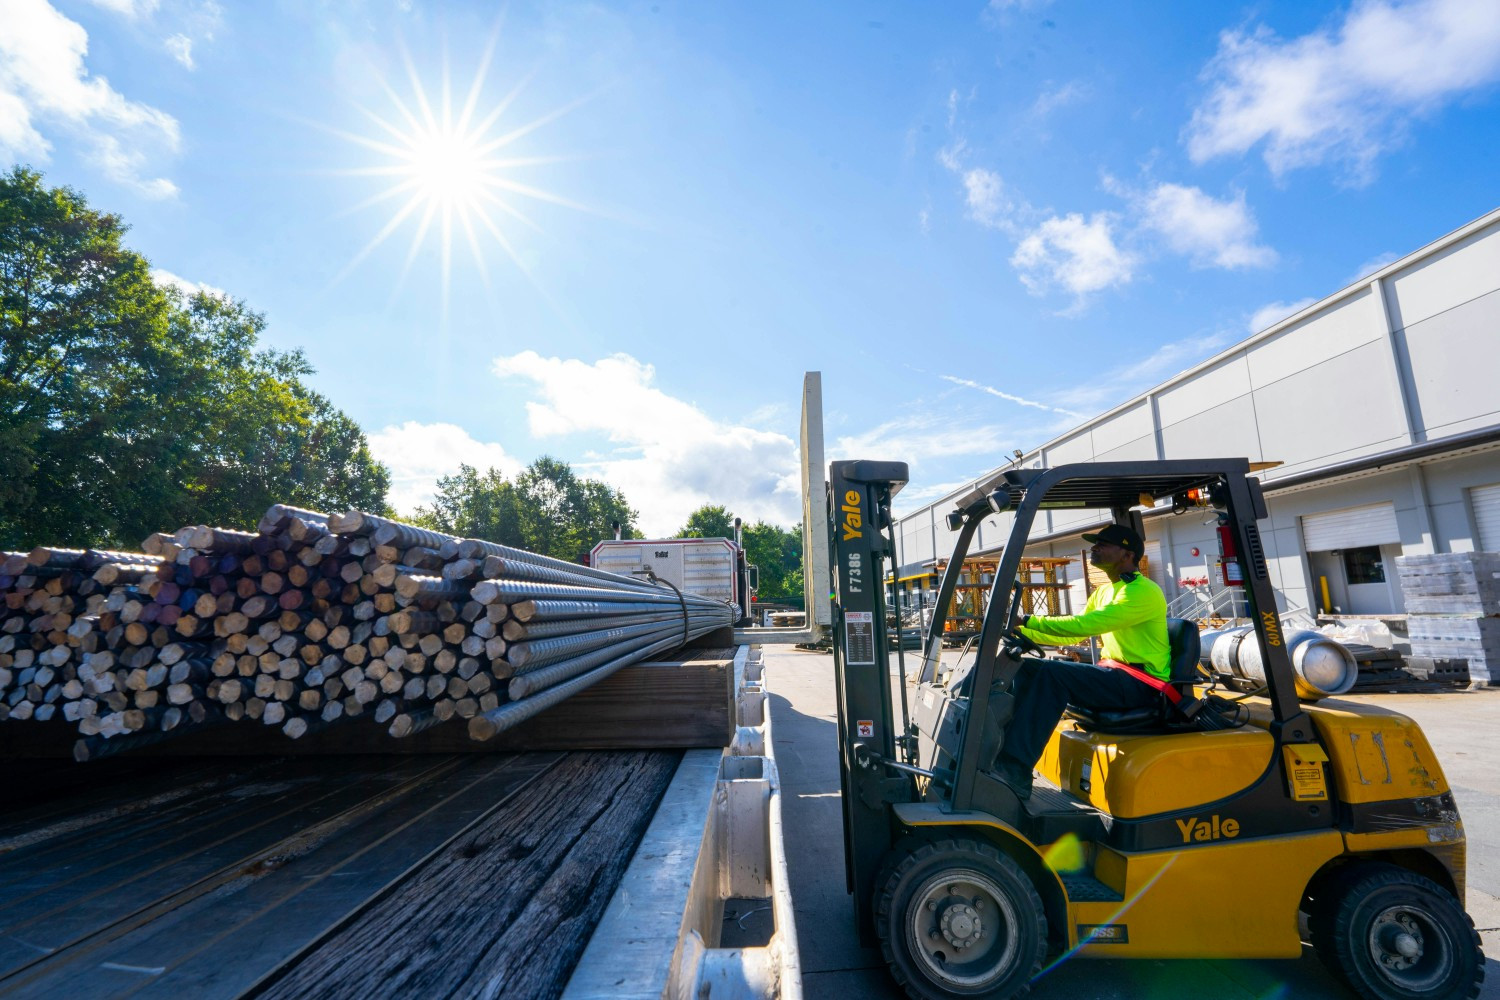 Our branches offer a variety of products and services from lumber to rebar to concrete, power tools, safety gear.